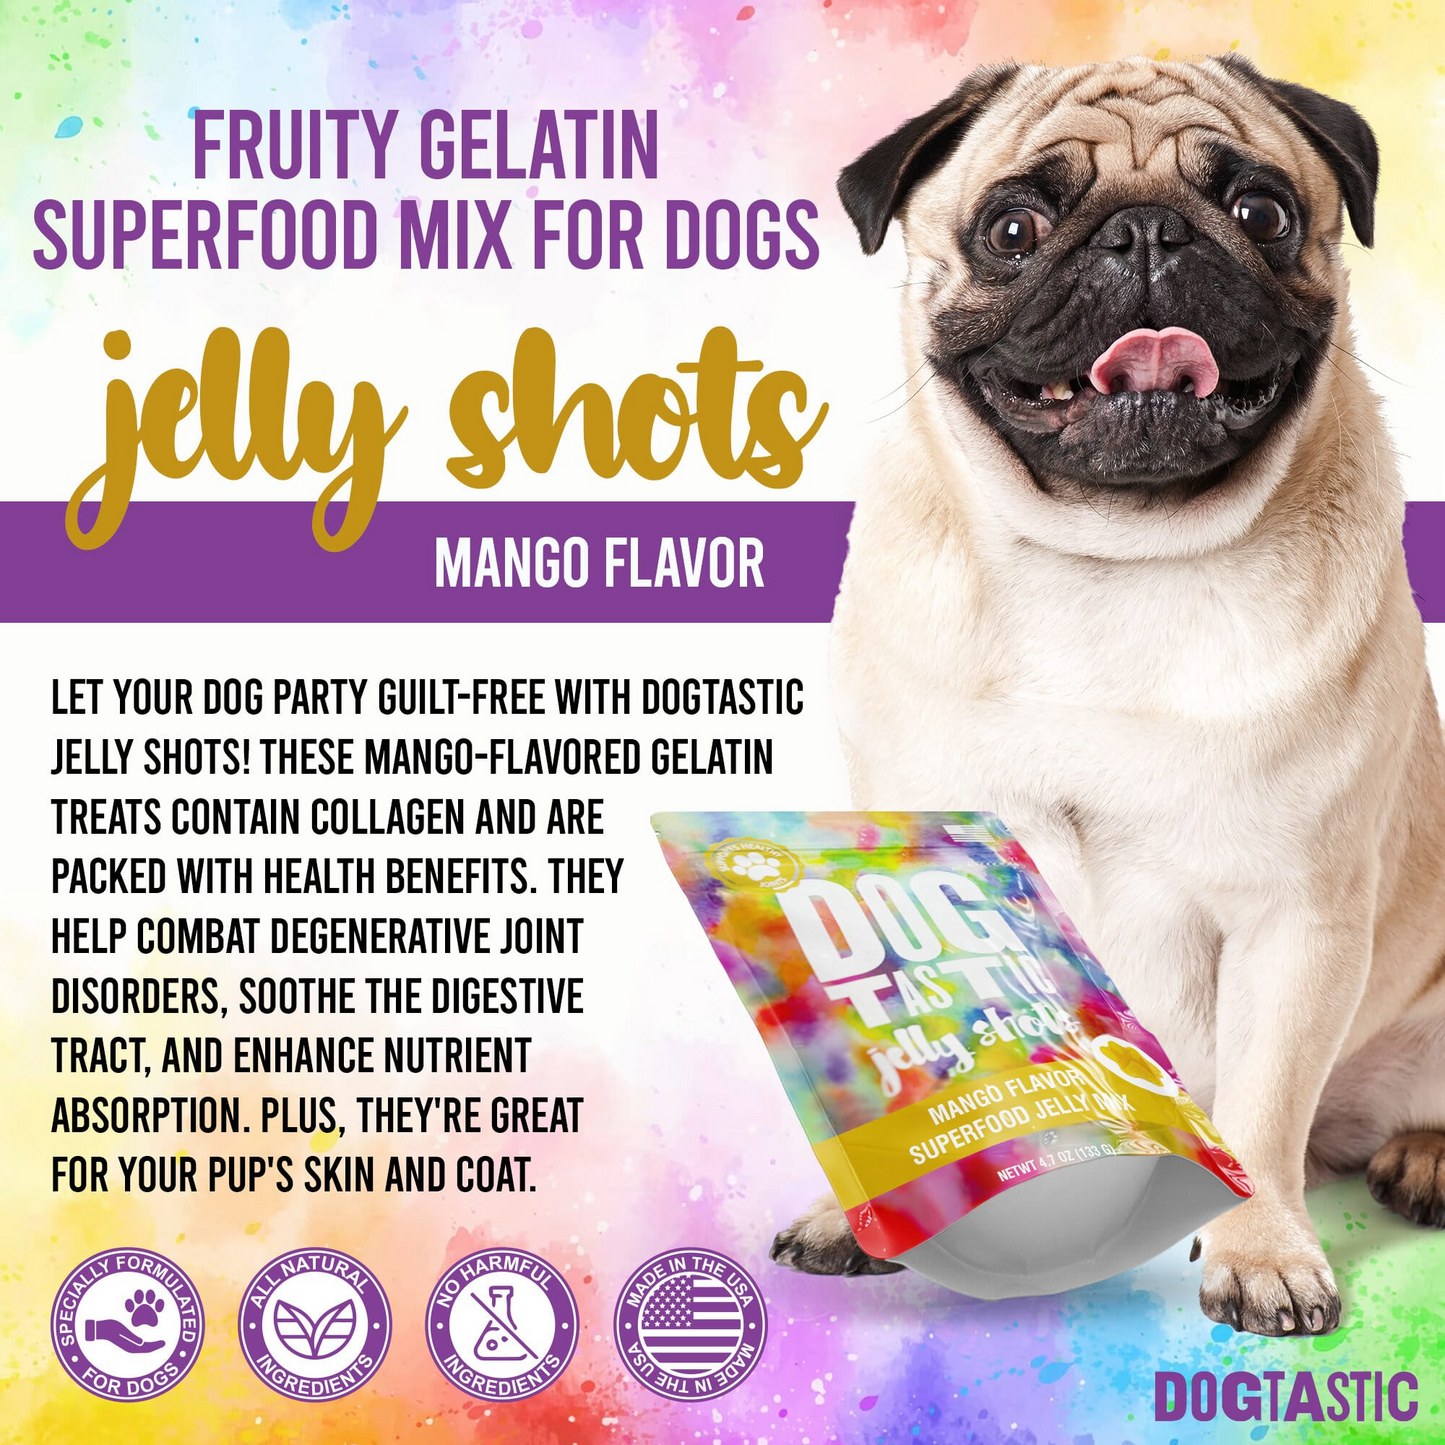 Dogtastic Jelly Shots Gelatin Mix for Dogs - Mango Flavor T&T